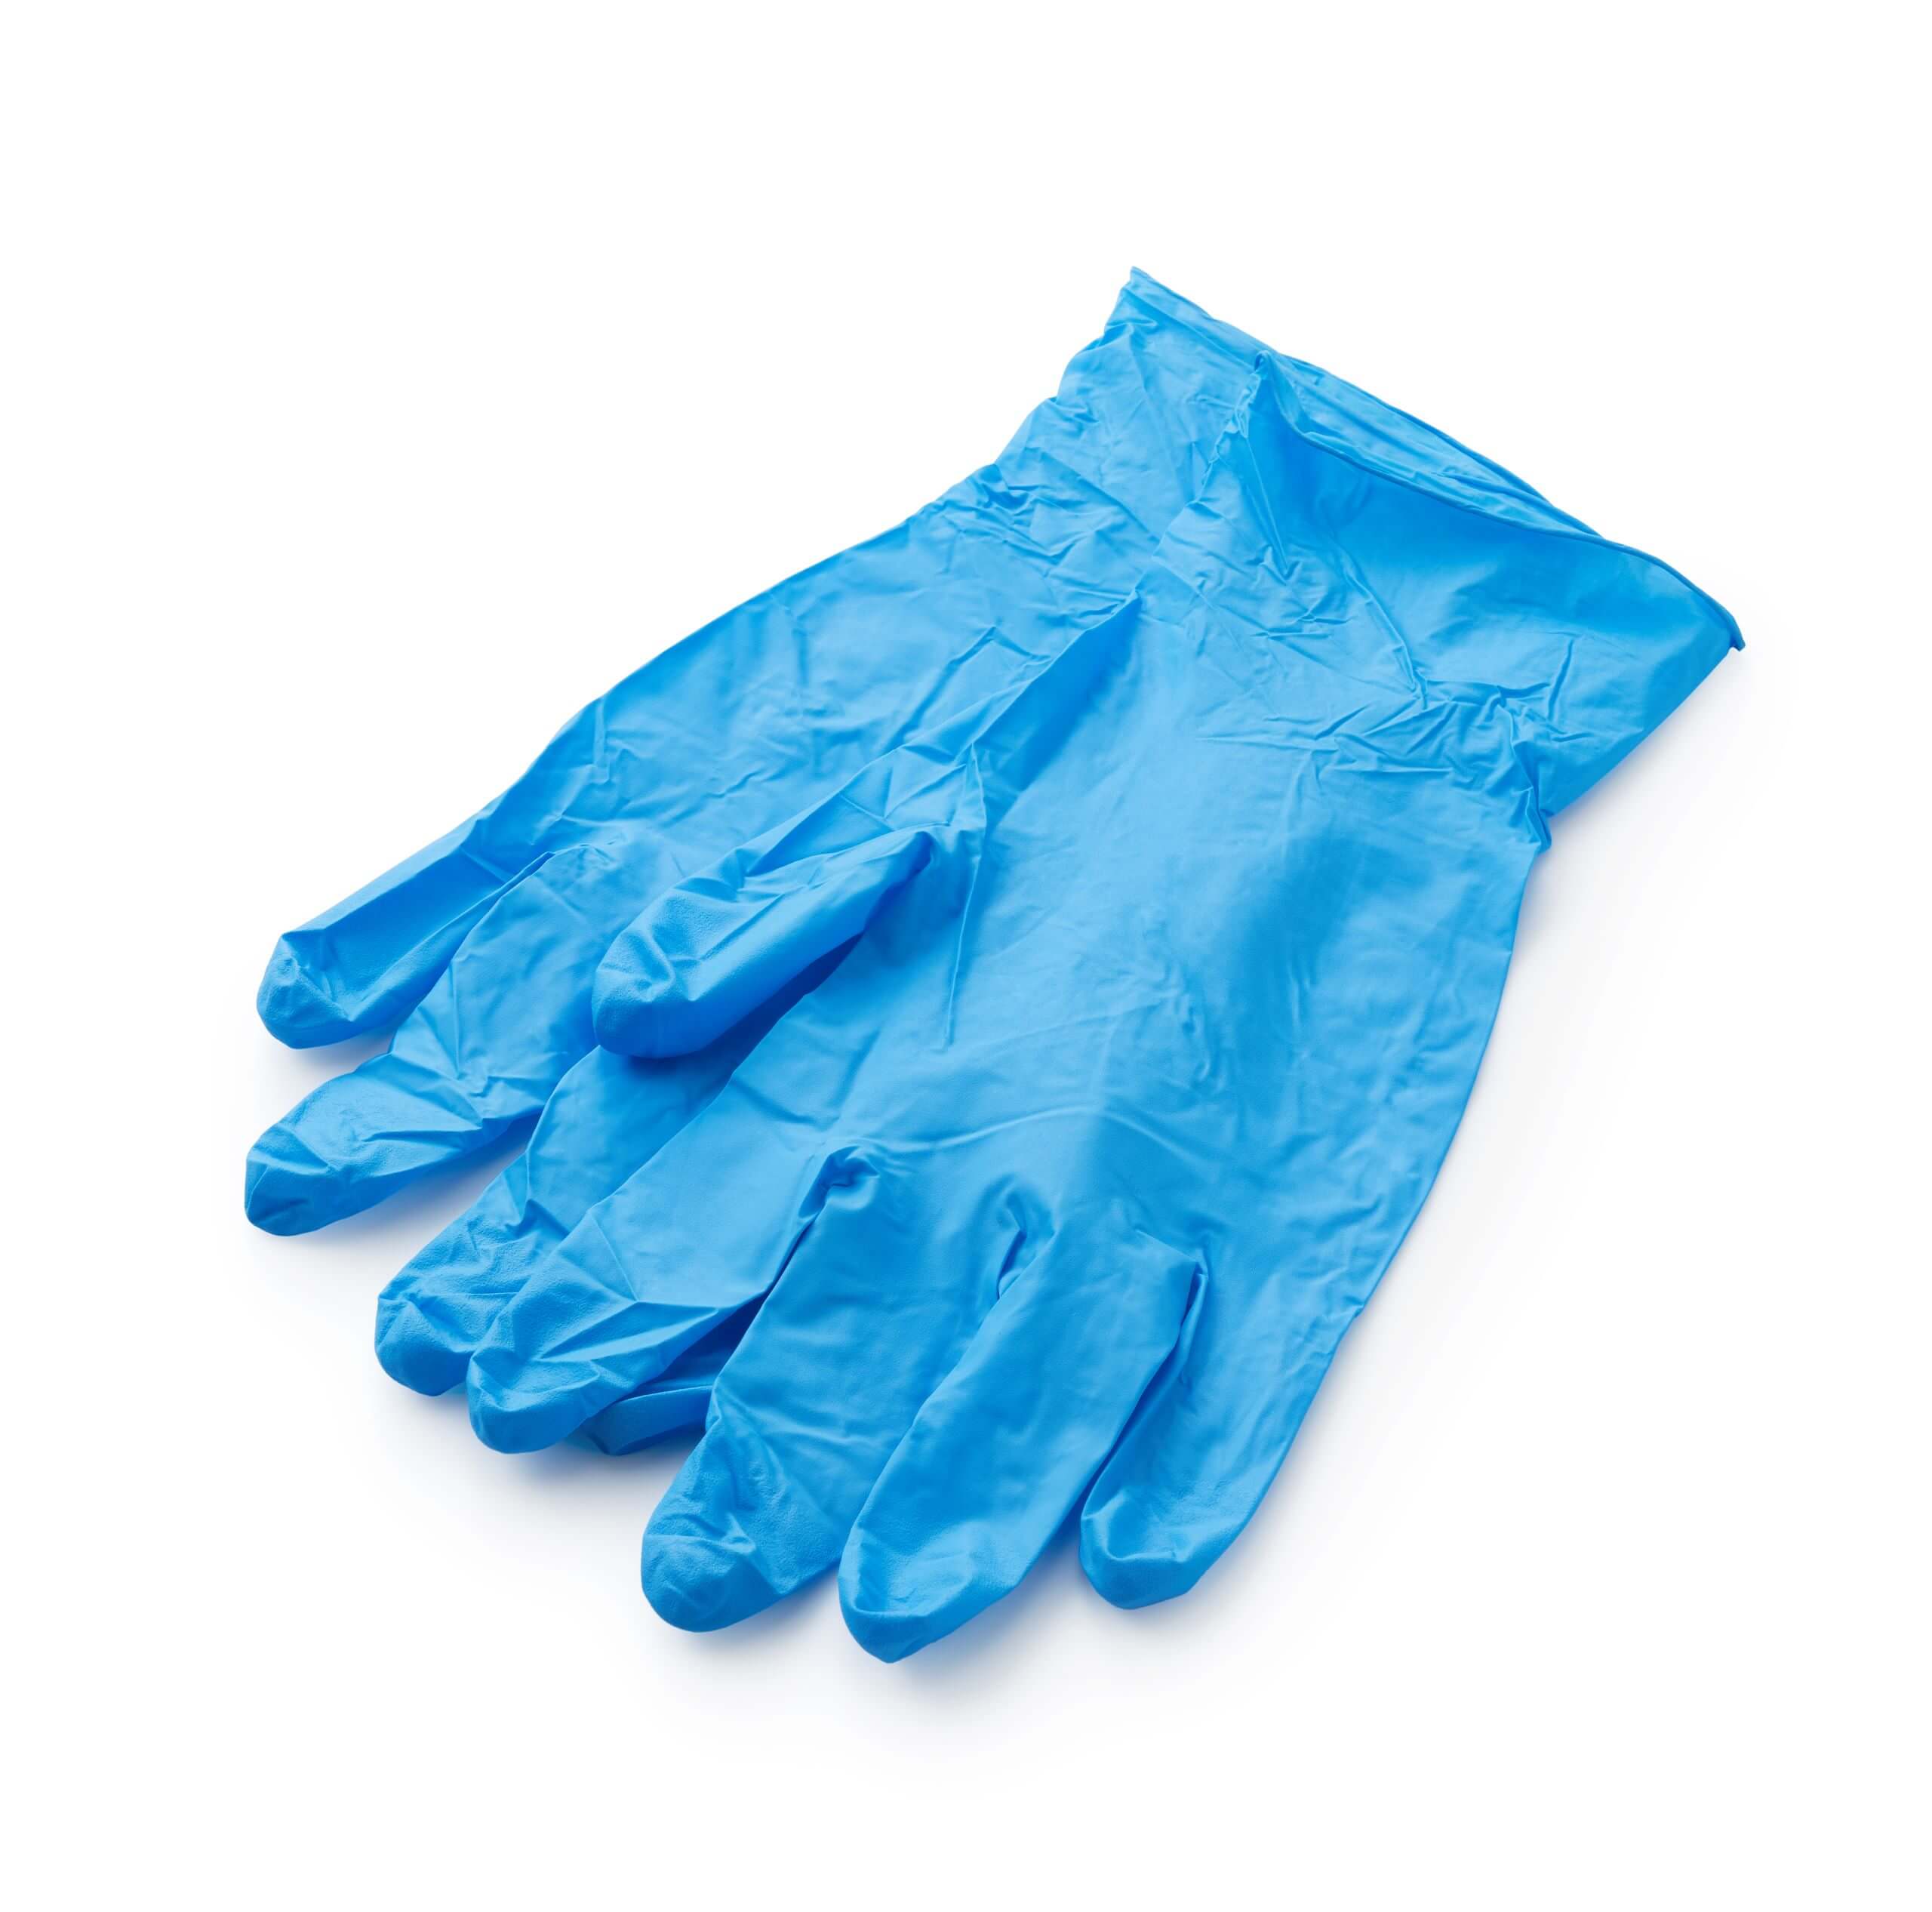 An image of Disposable Vinyl Hand Gloves.